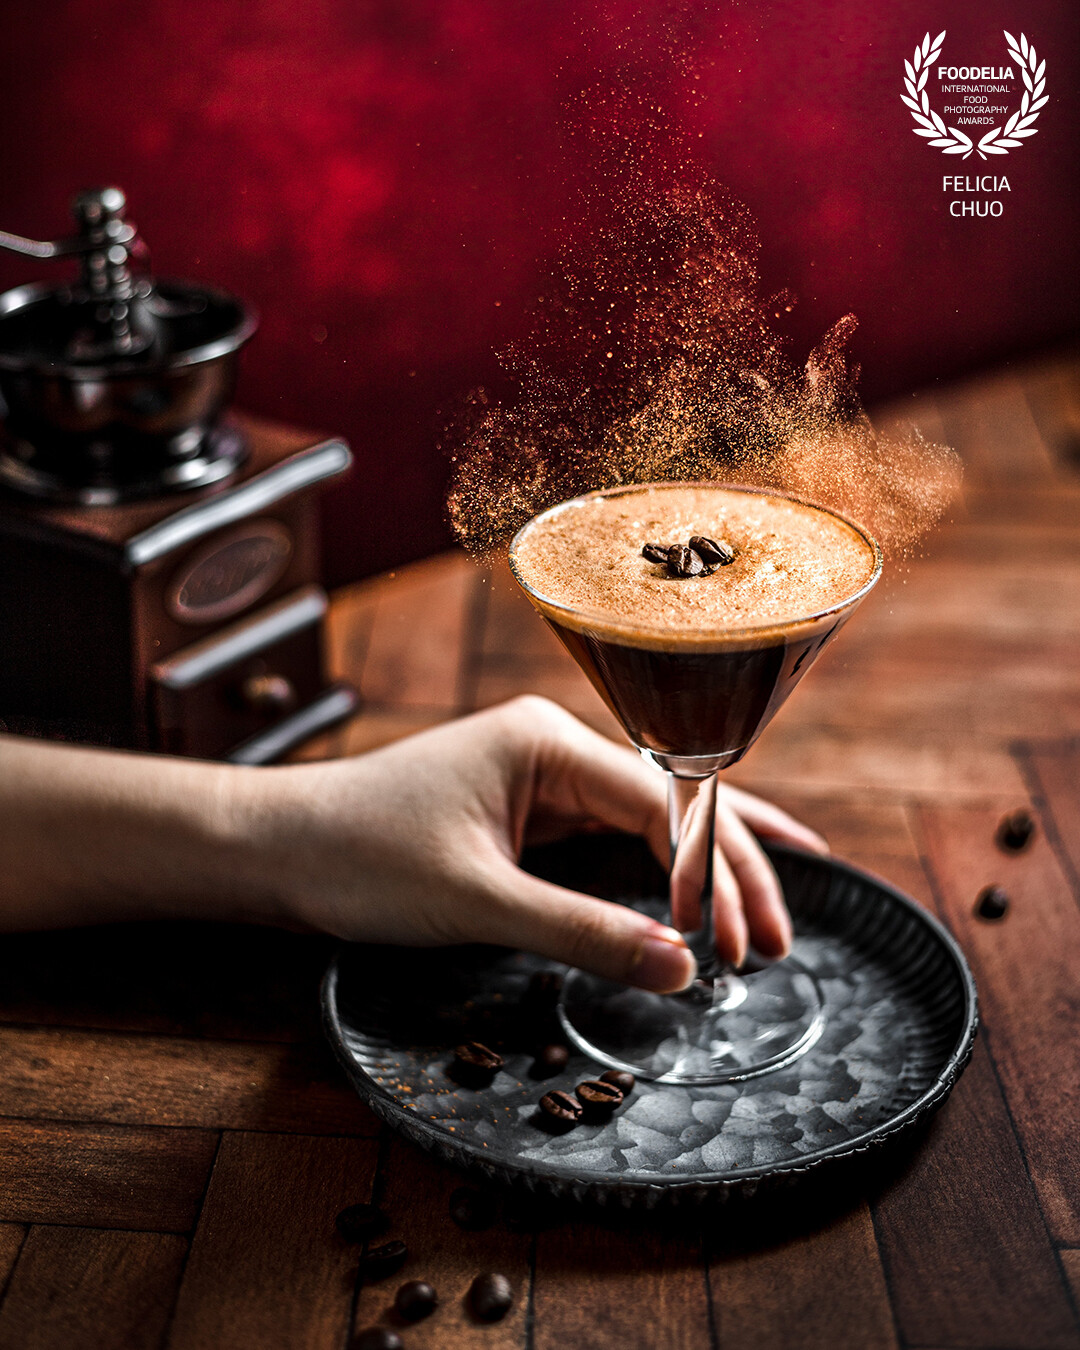 A fake espresso martini with a hint of golden luxury.